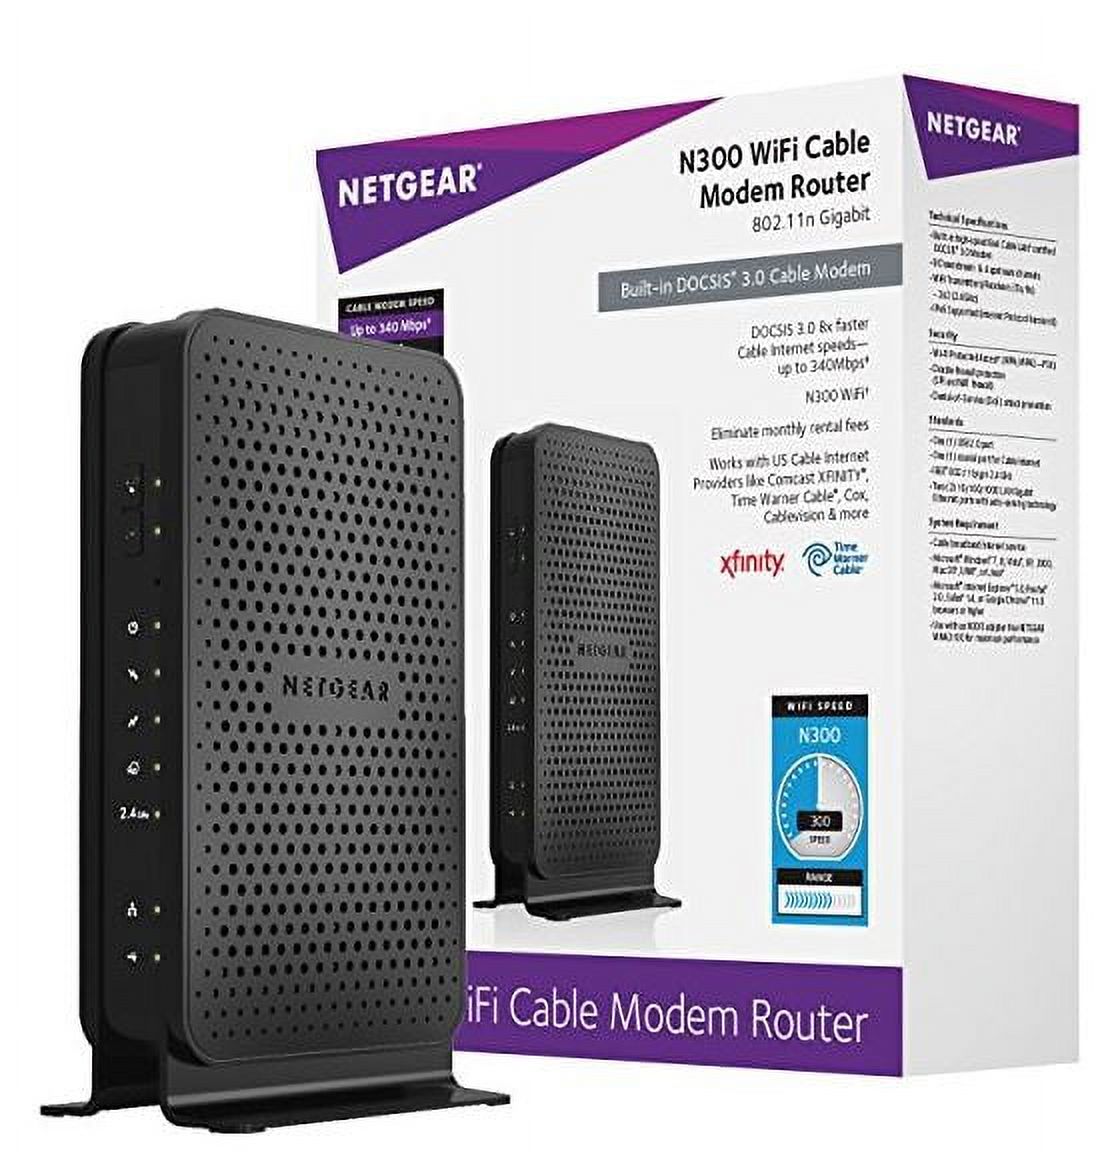 NETGEAR N300 (8x4) WiFi Cable Modem Router Combo C3000, DOCSIS 3.0 | Certified for Xfinity by Comcast, Spectrum, COX & more (C3000) - image 1 of 4